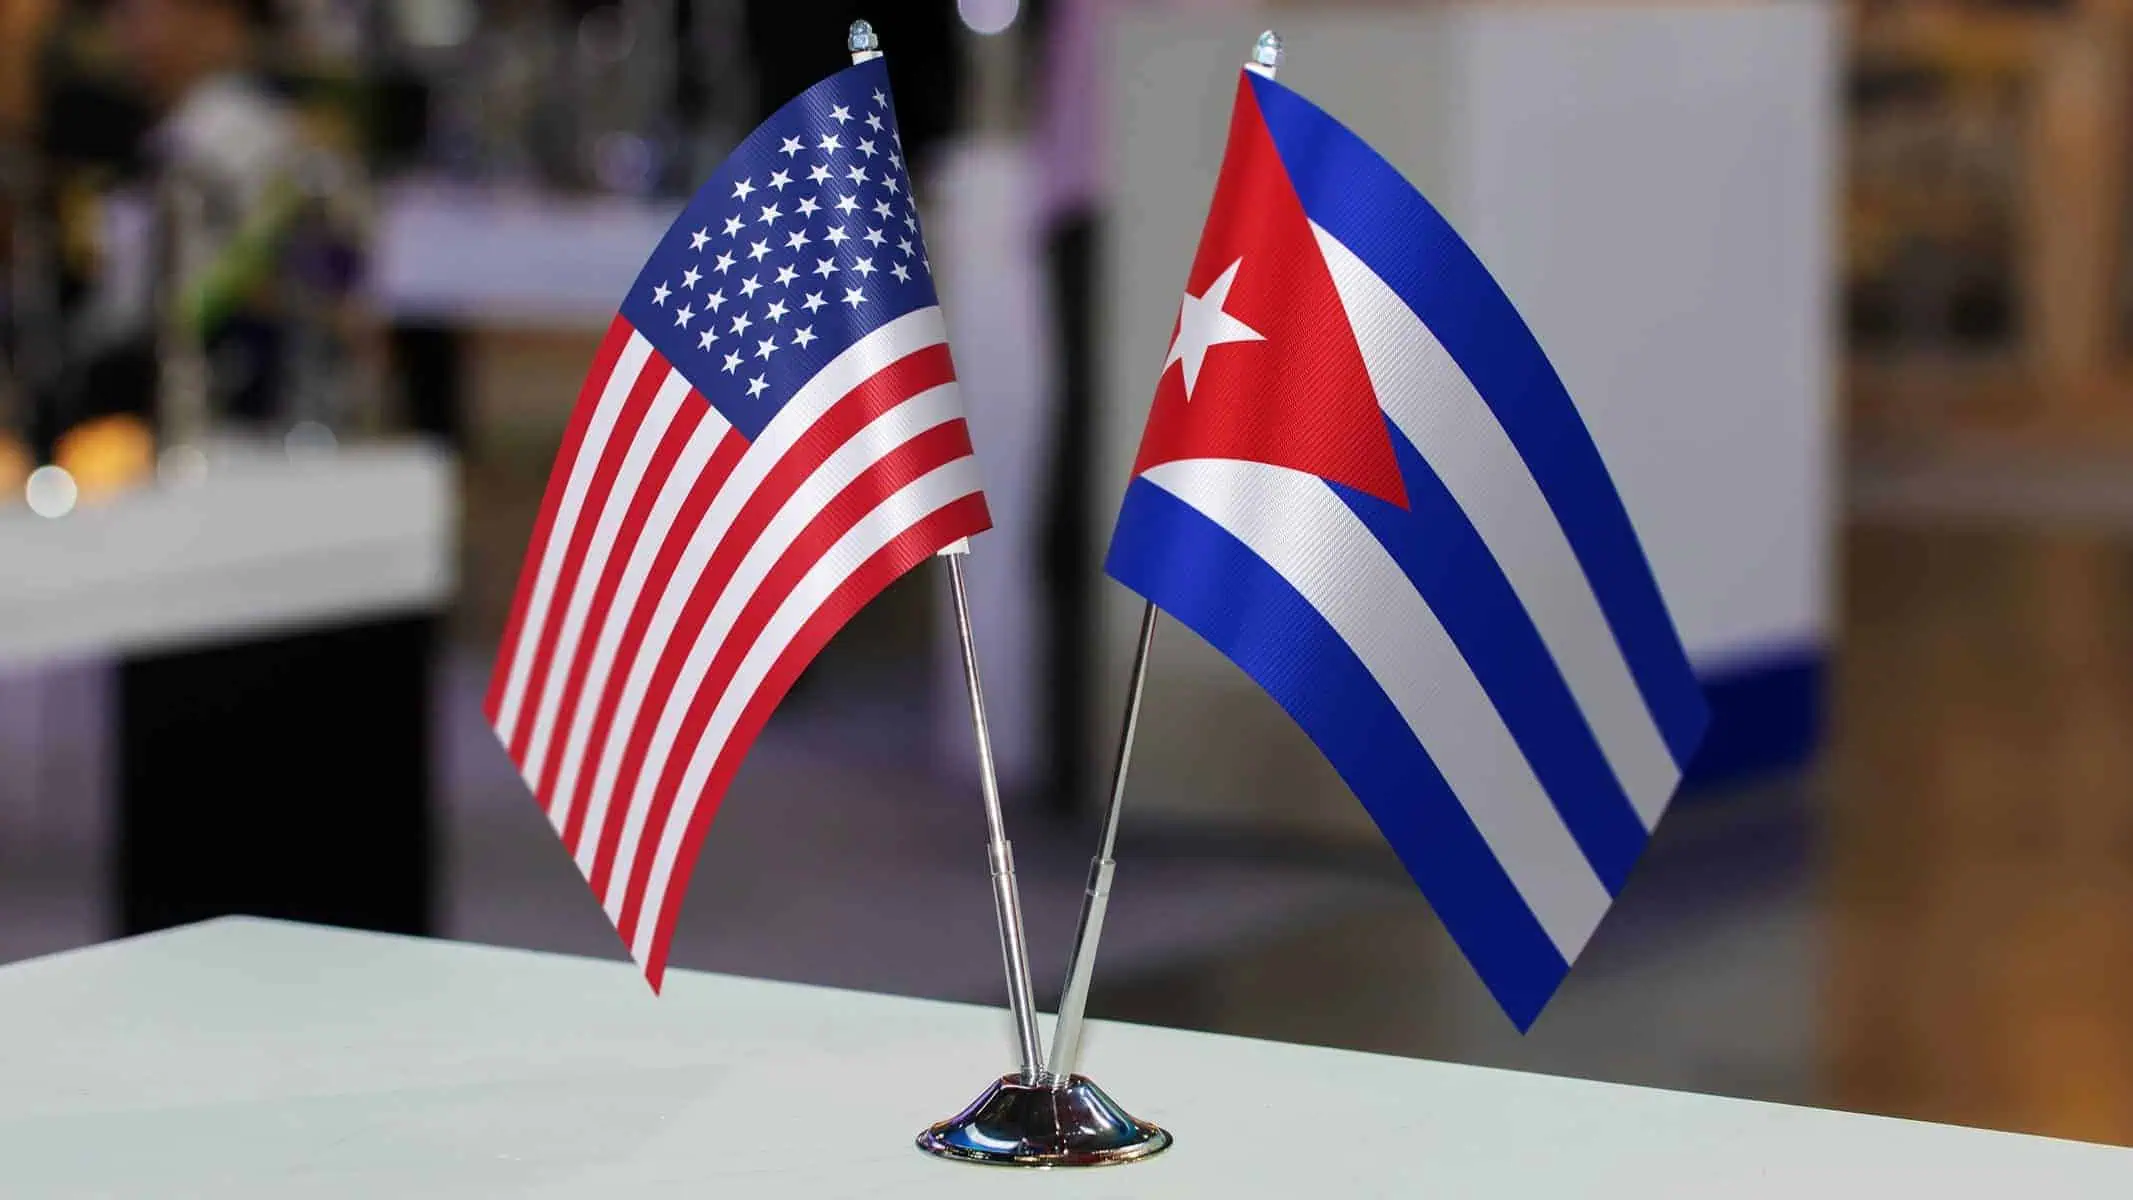 Why Did the U.S. Remove Cuba from Its List of Non-Cooperating Countries in the Fight Against Terrorism